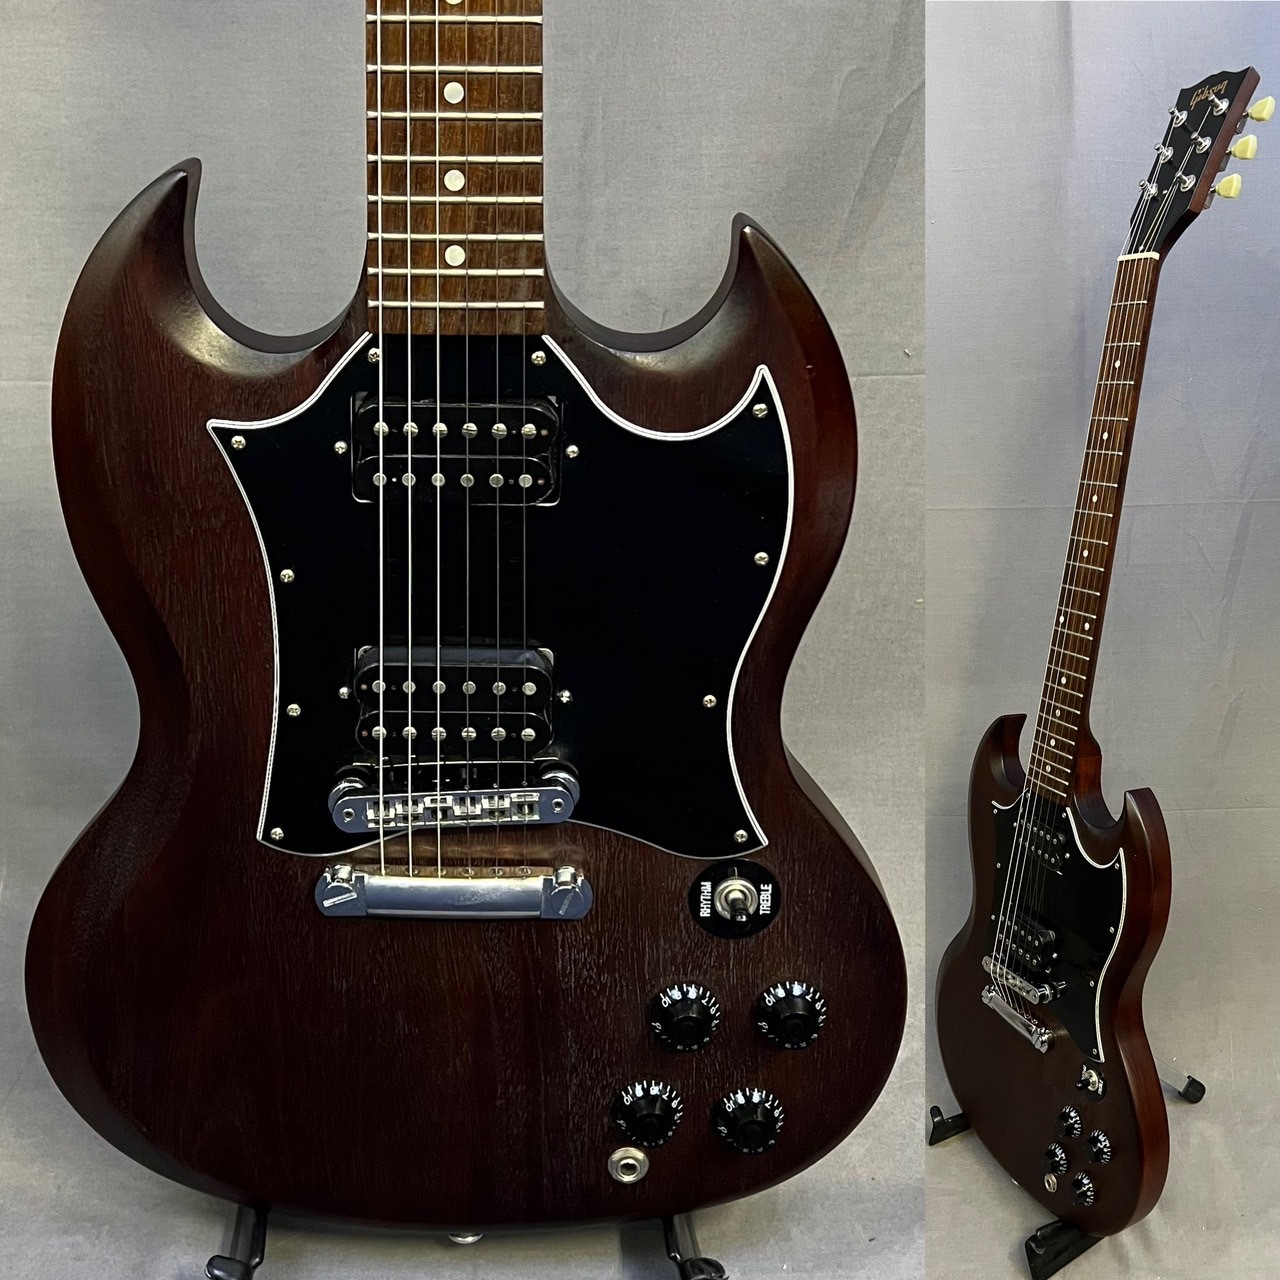 Gibson SG Special Faded 2016年製（中古）【楽器検索デジマート】